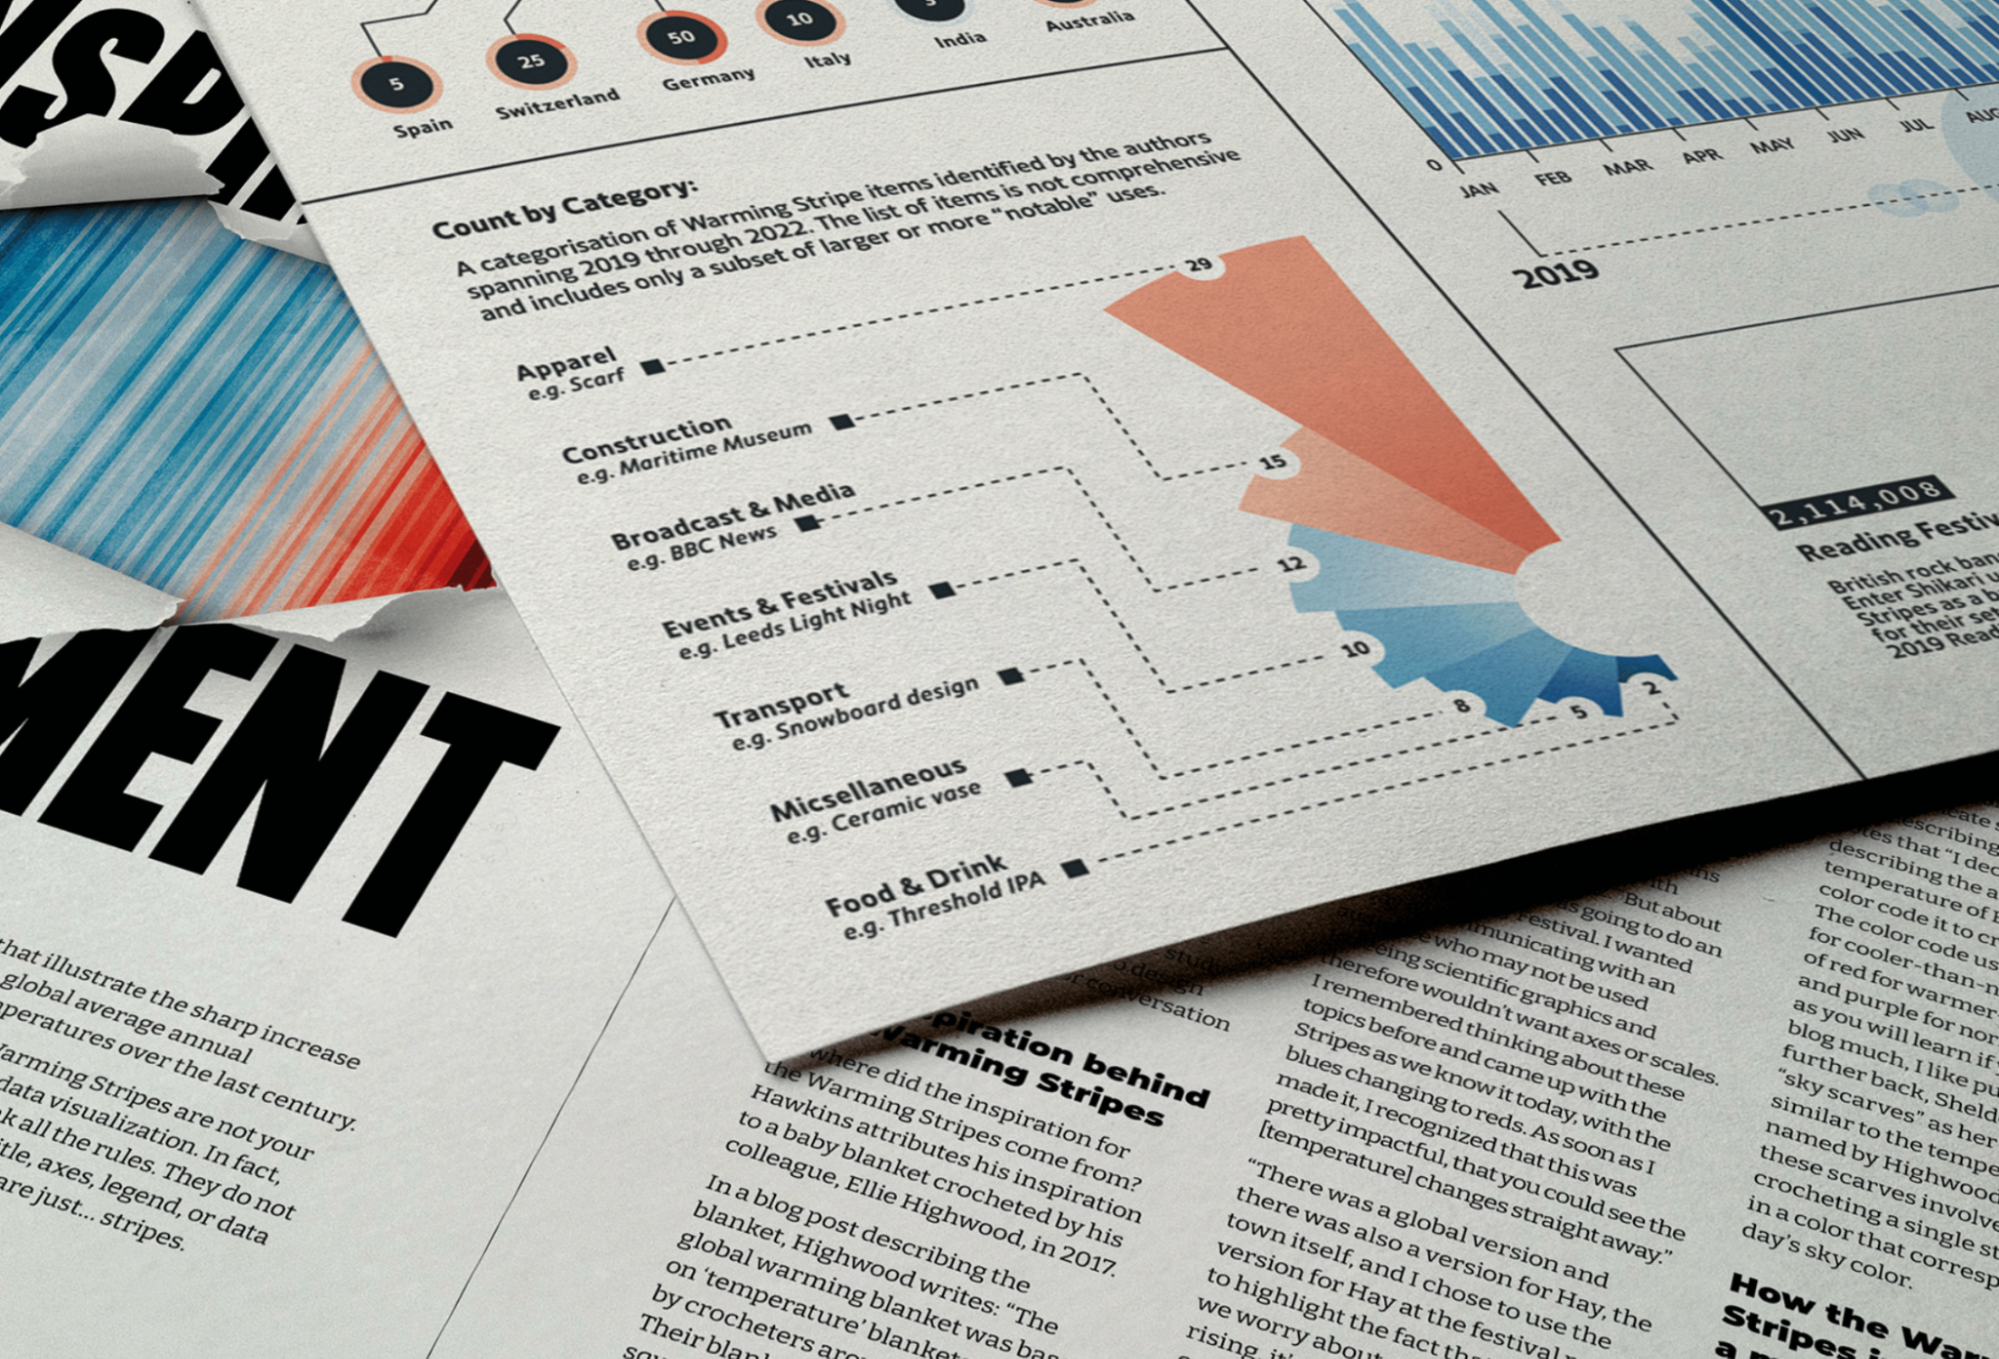 Details from an infographic and magazine article, showing the Warming Stripes on a page in the background with another page showing a red-and-blue polar bar chart laying over the top